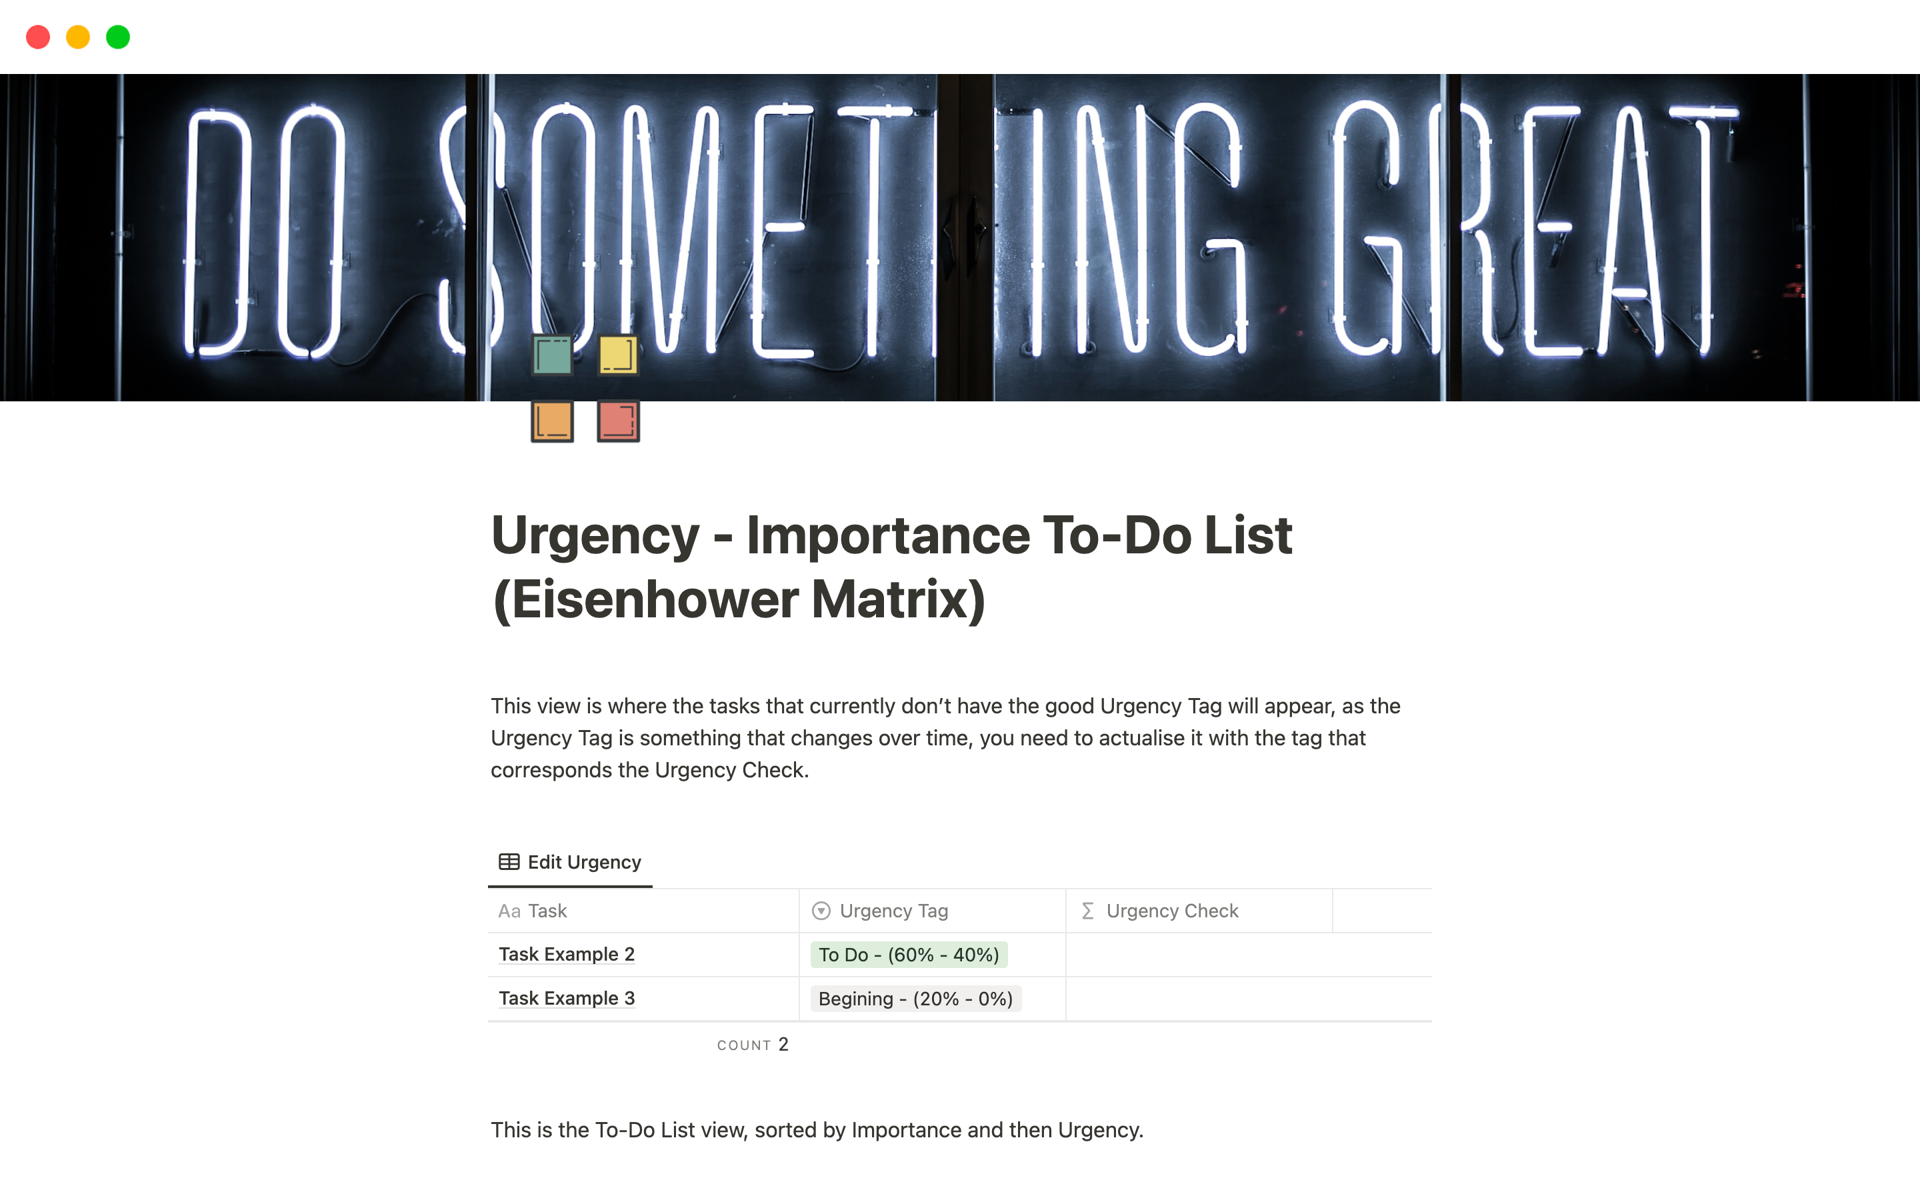 Eisenhower Matrix is a To-Do List focusing on importancy and urgency of your tasks, it is a way to organize tasks by urgency and importance, so you can effectively prioritize your most important work. 
Think of it as a better way of organizing your tasks.